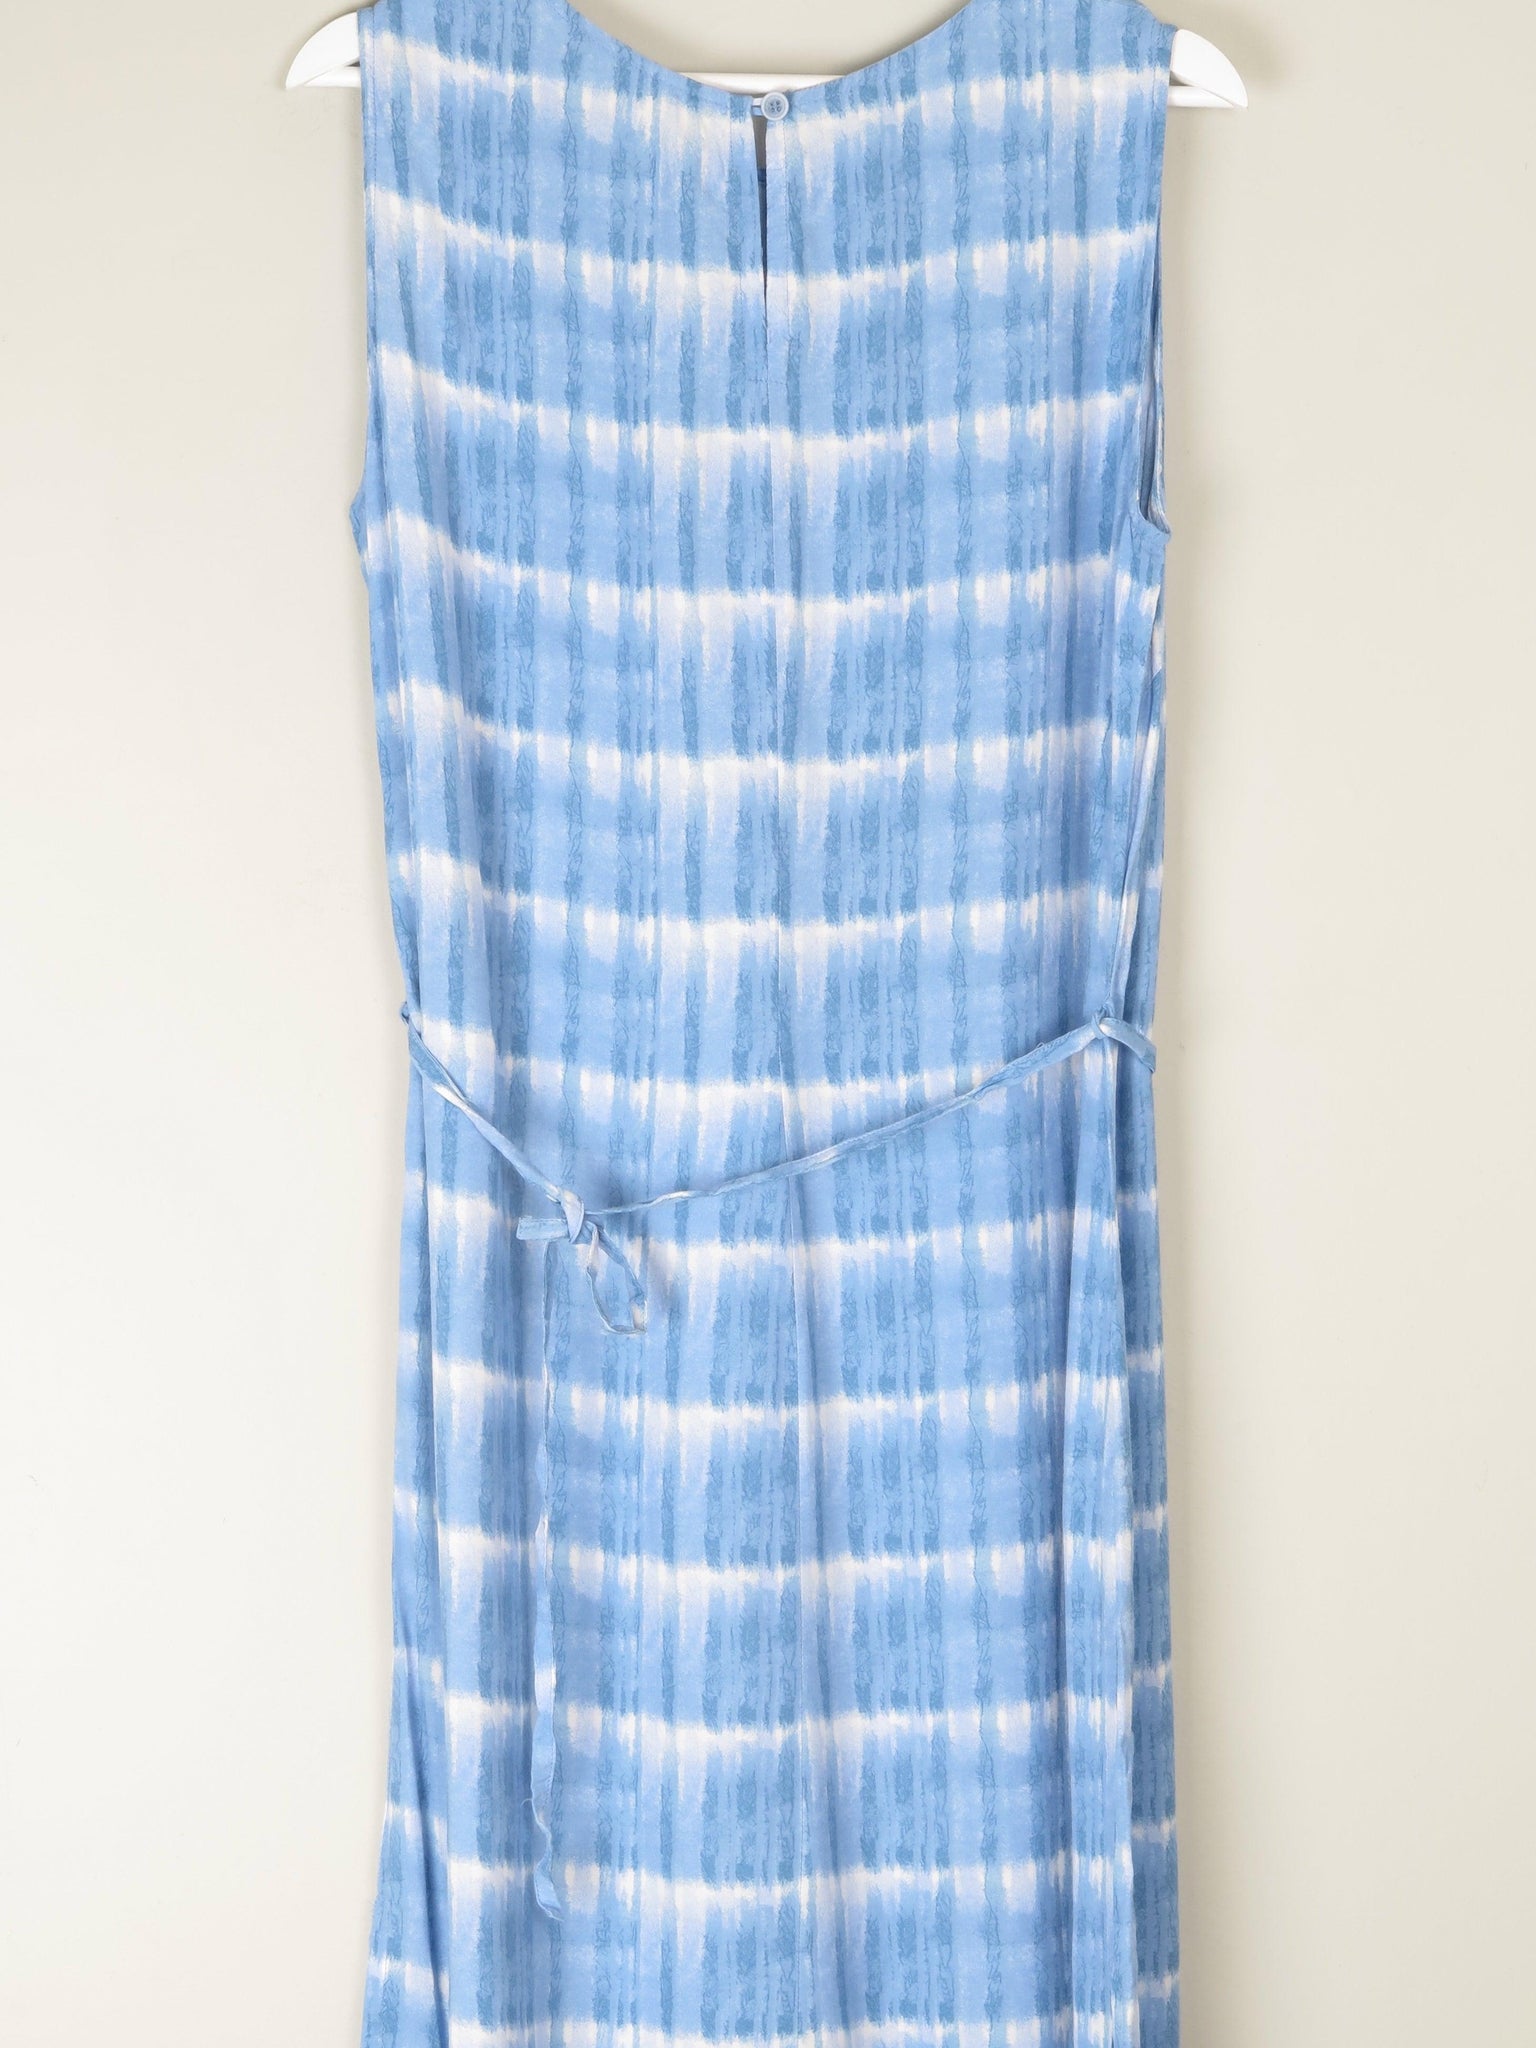 1990s Blue Check Style Graphic Print Long Dress M/L - The Harlequin